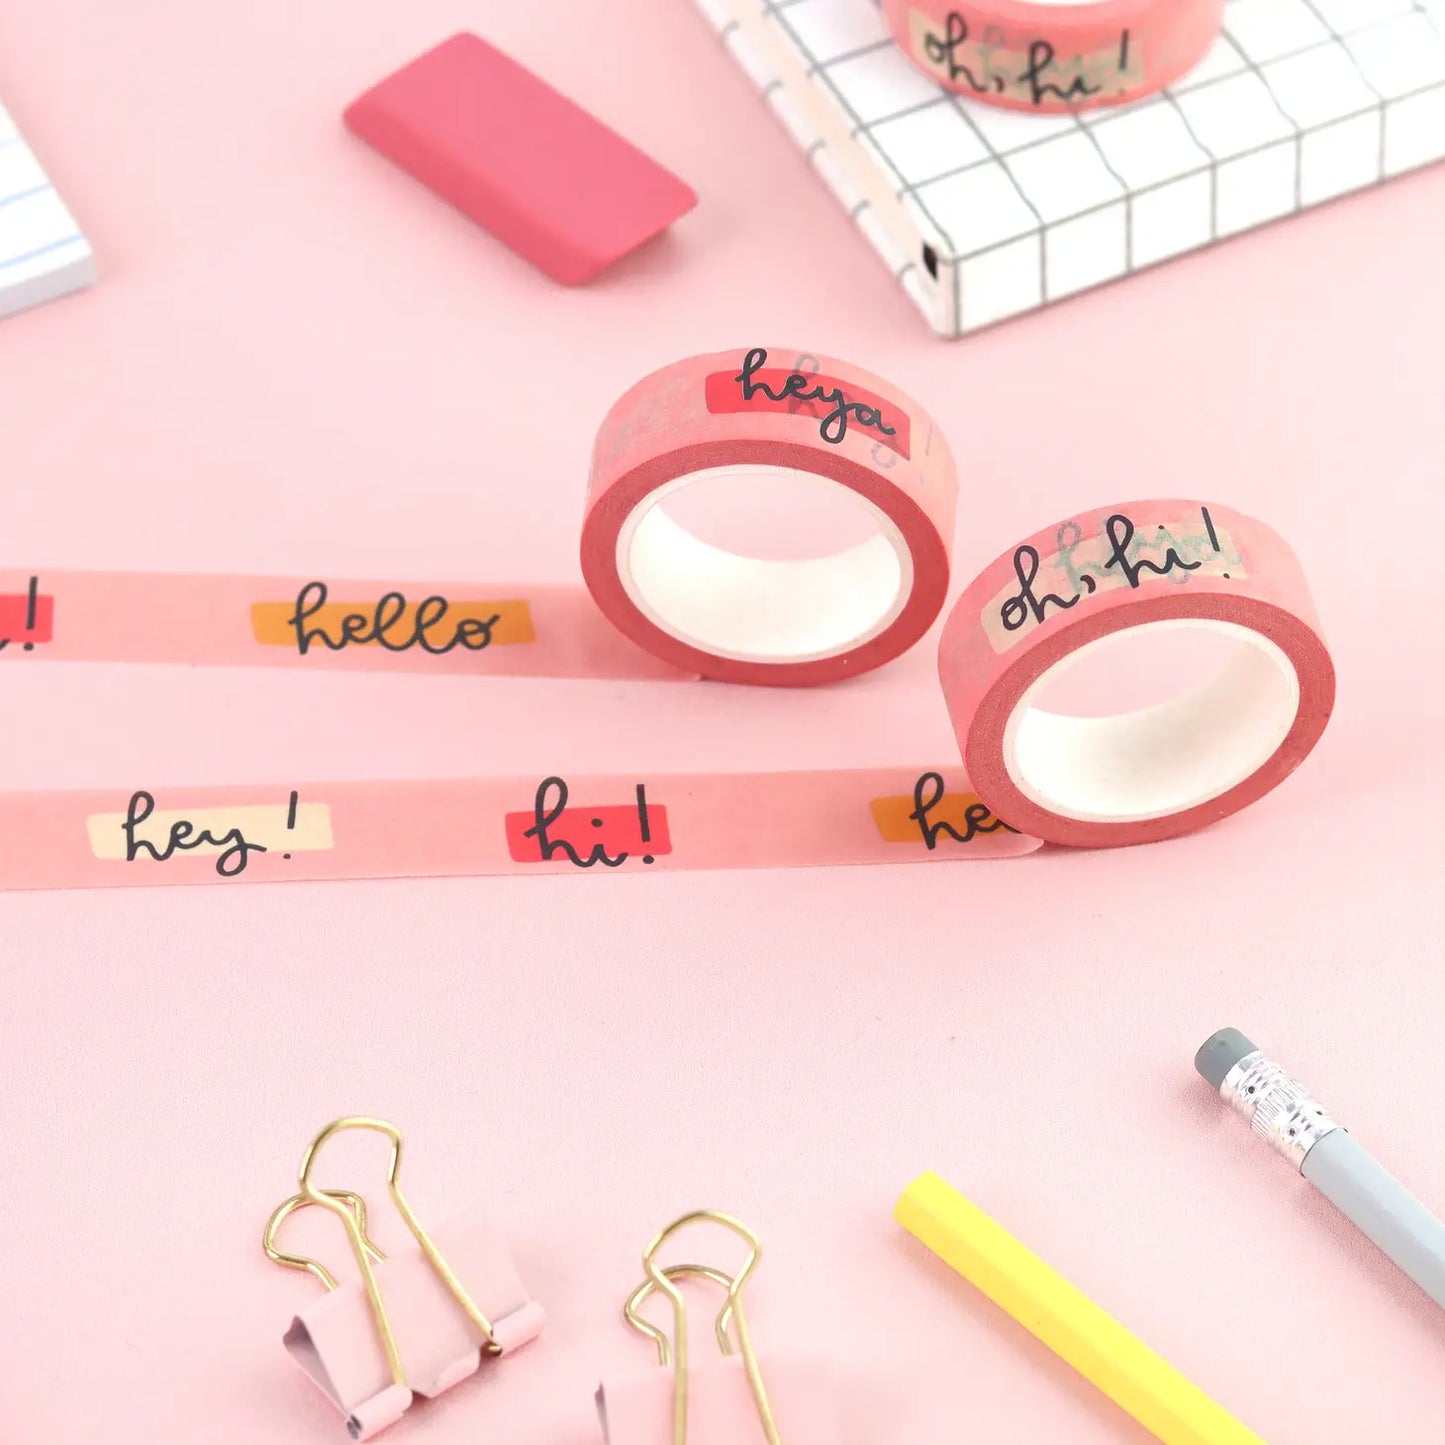 Pink hello washi tape, surrounded by other stationery items